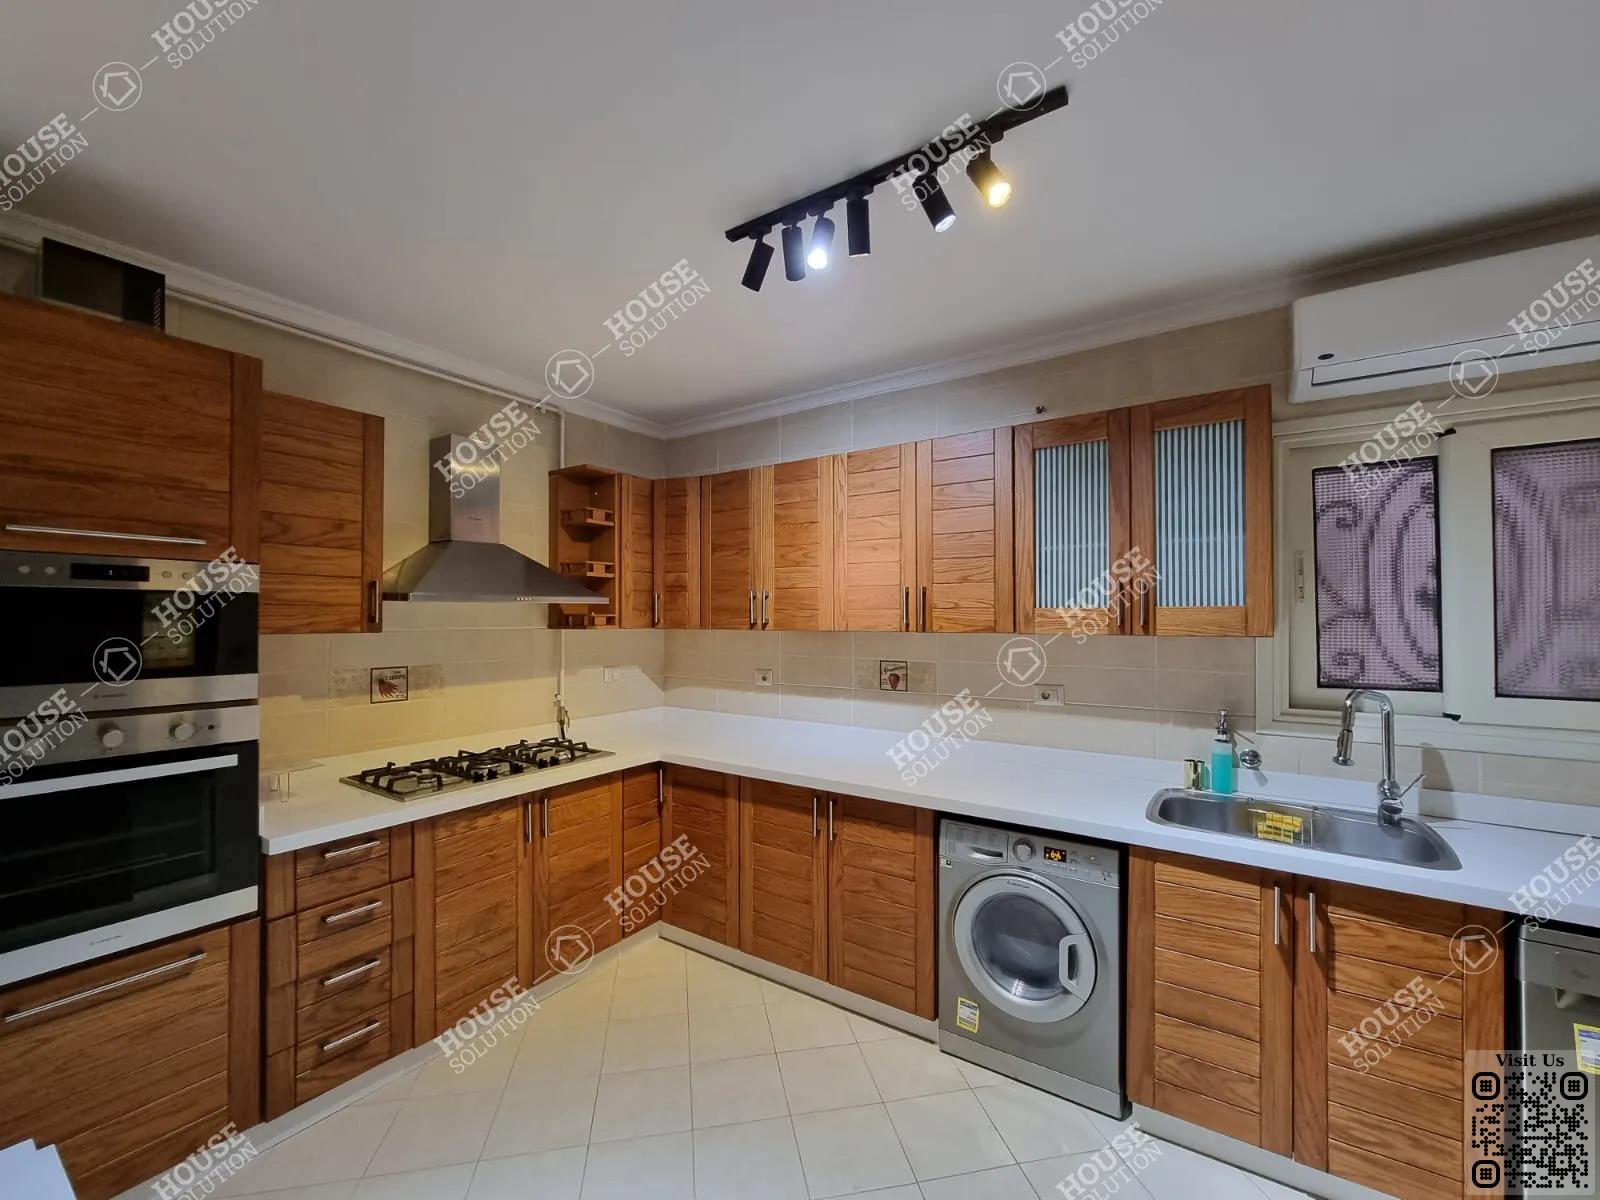 KITCHEN  @ Apartments For Rent In Maadi Maadi Sarayat Area: 240 m² consists of 3 Bedrooms 3 Bathrooms Modern furnished 5 stars #5331-1